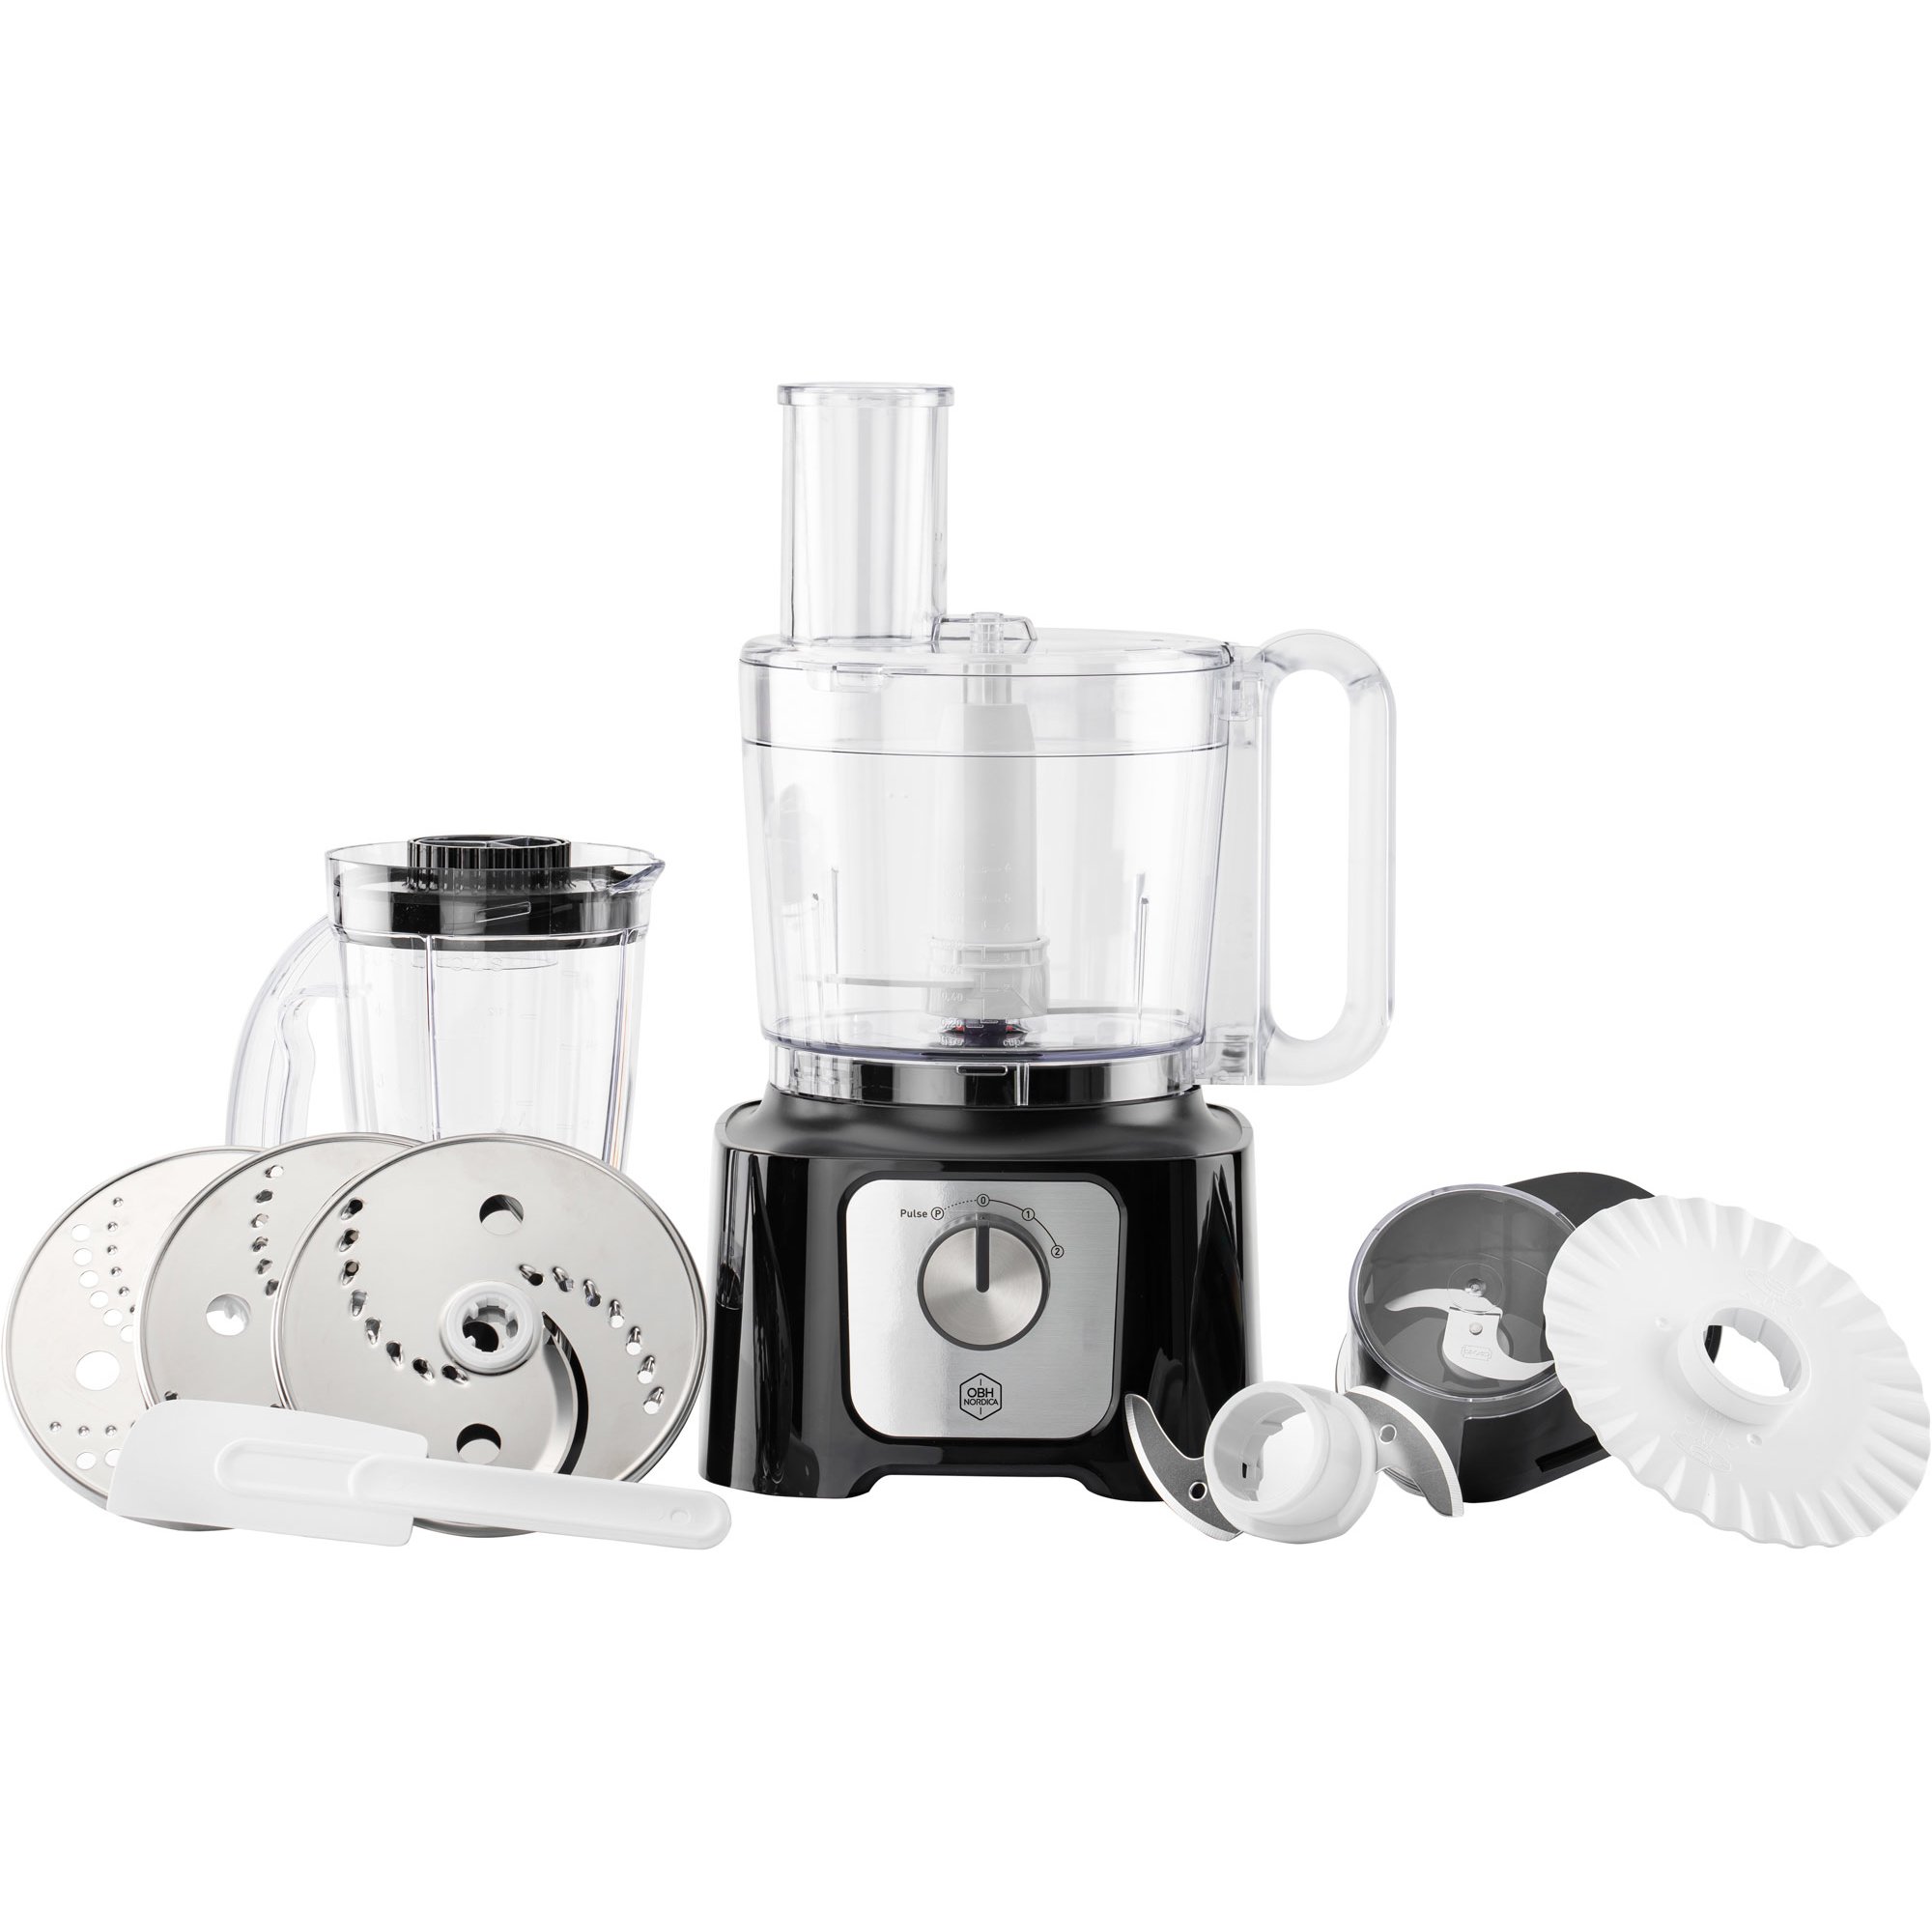 OBH Nordica Double Force Compact foodprocessor